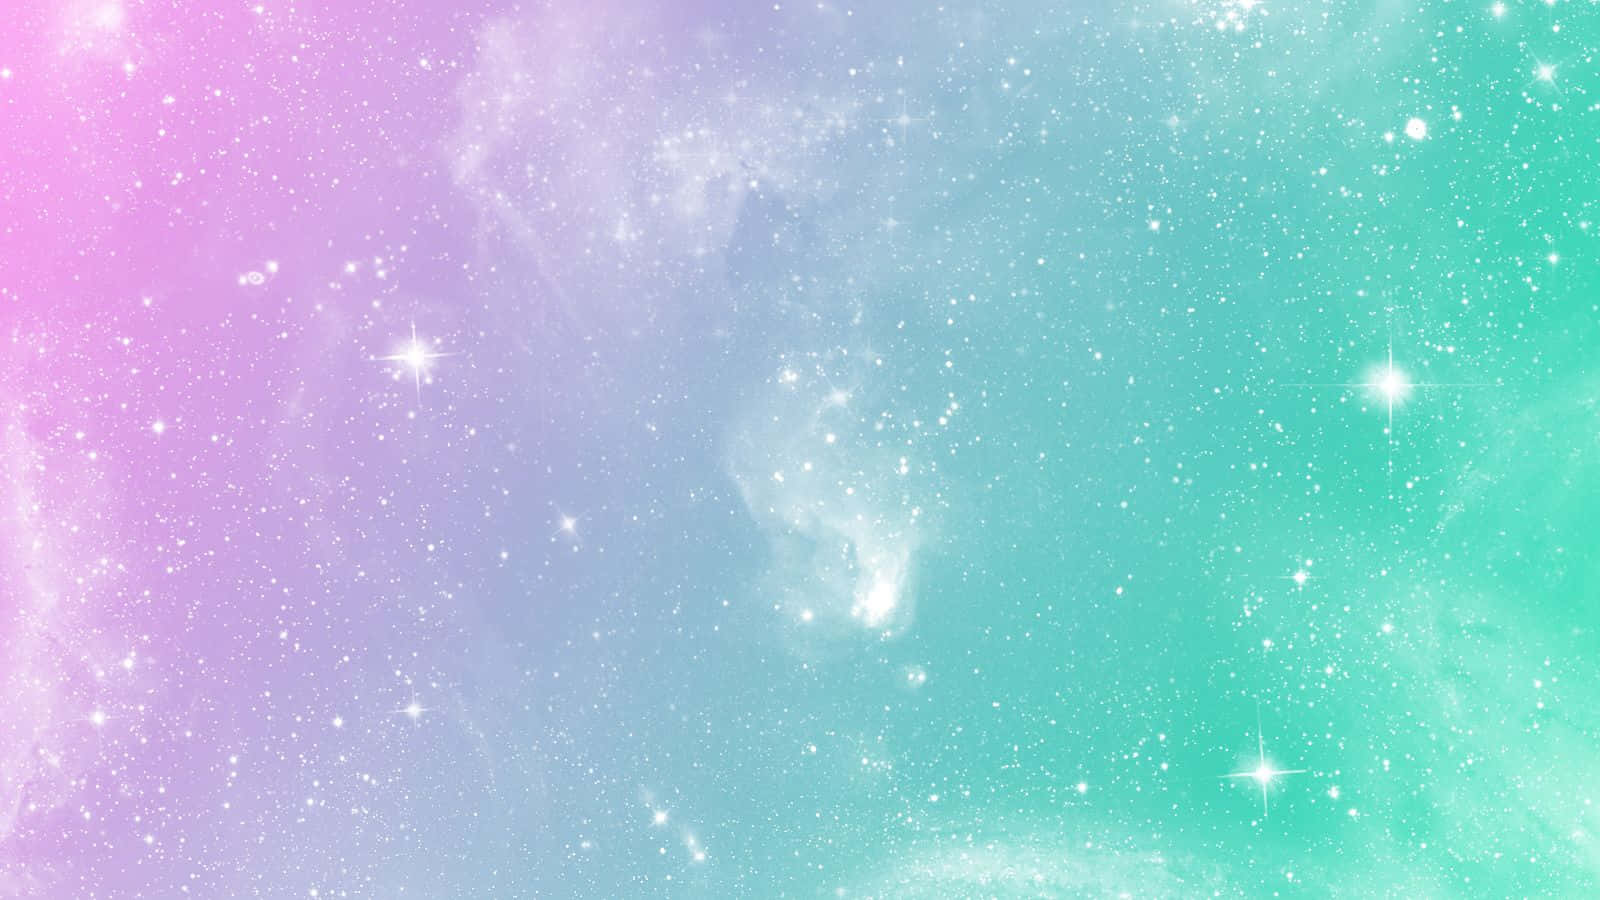 A Pink And Blue Galaxy Wallpaper With Stars Wallpaper